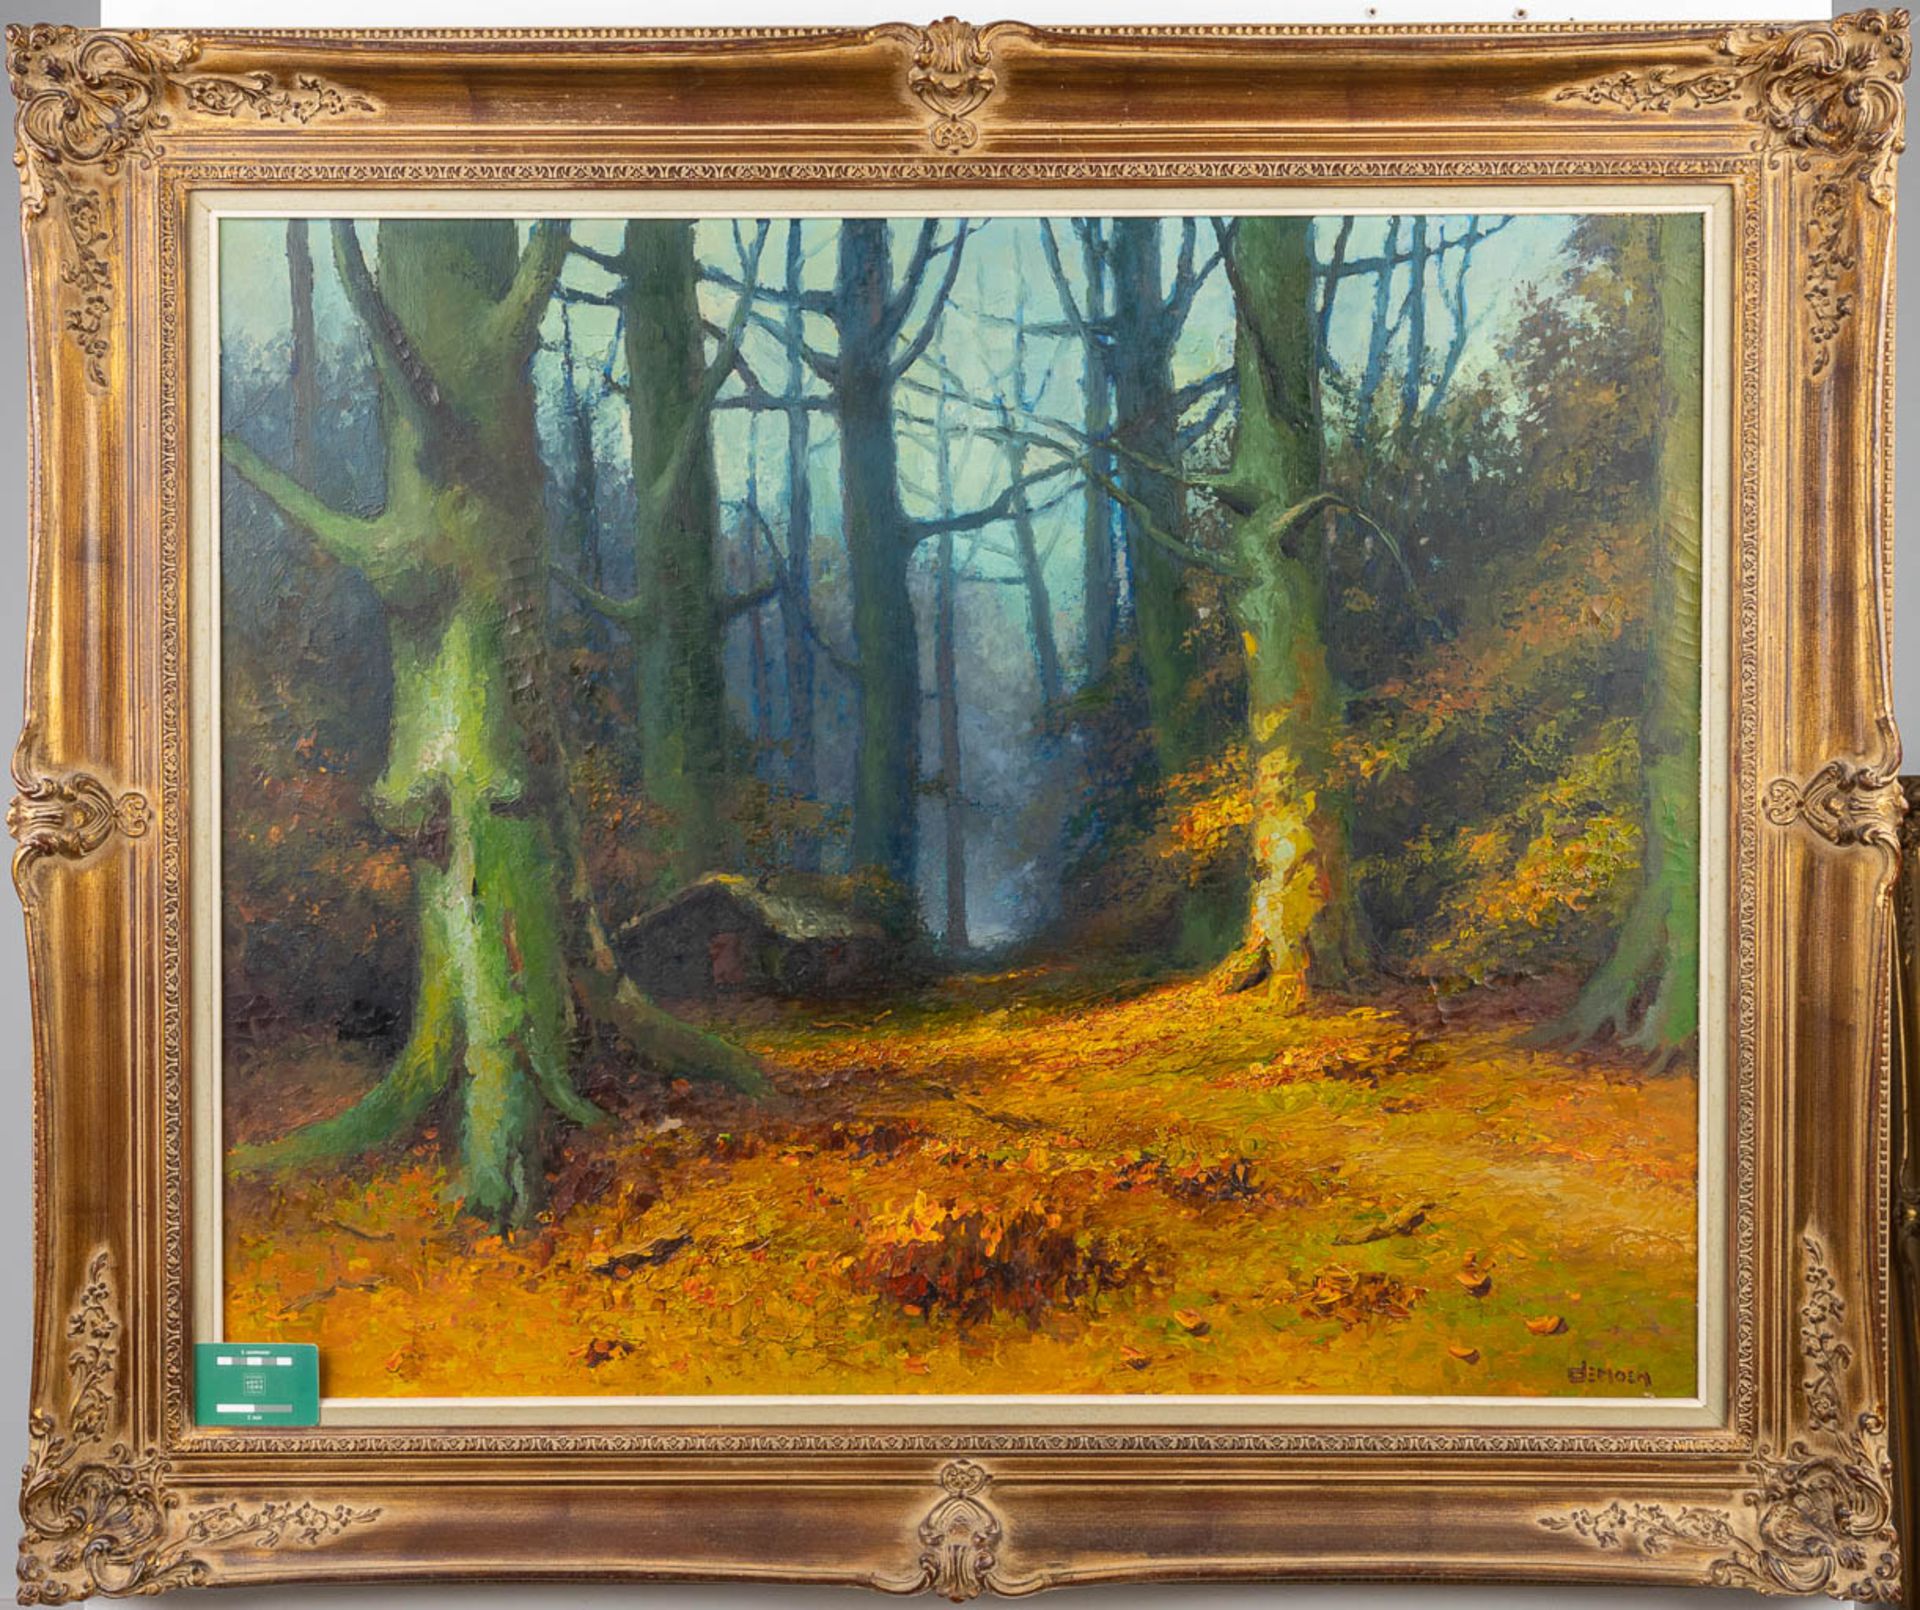 Albert DEMOEN (1916) 'Forest View' oil on canvas (100 x 80cm) - Image 6 of 6